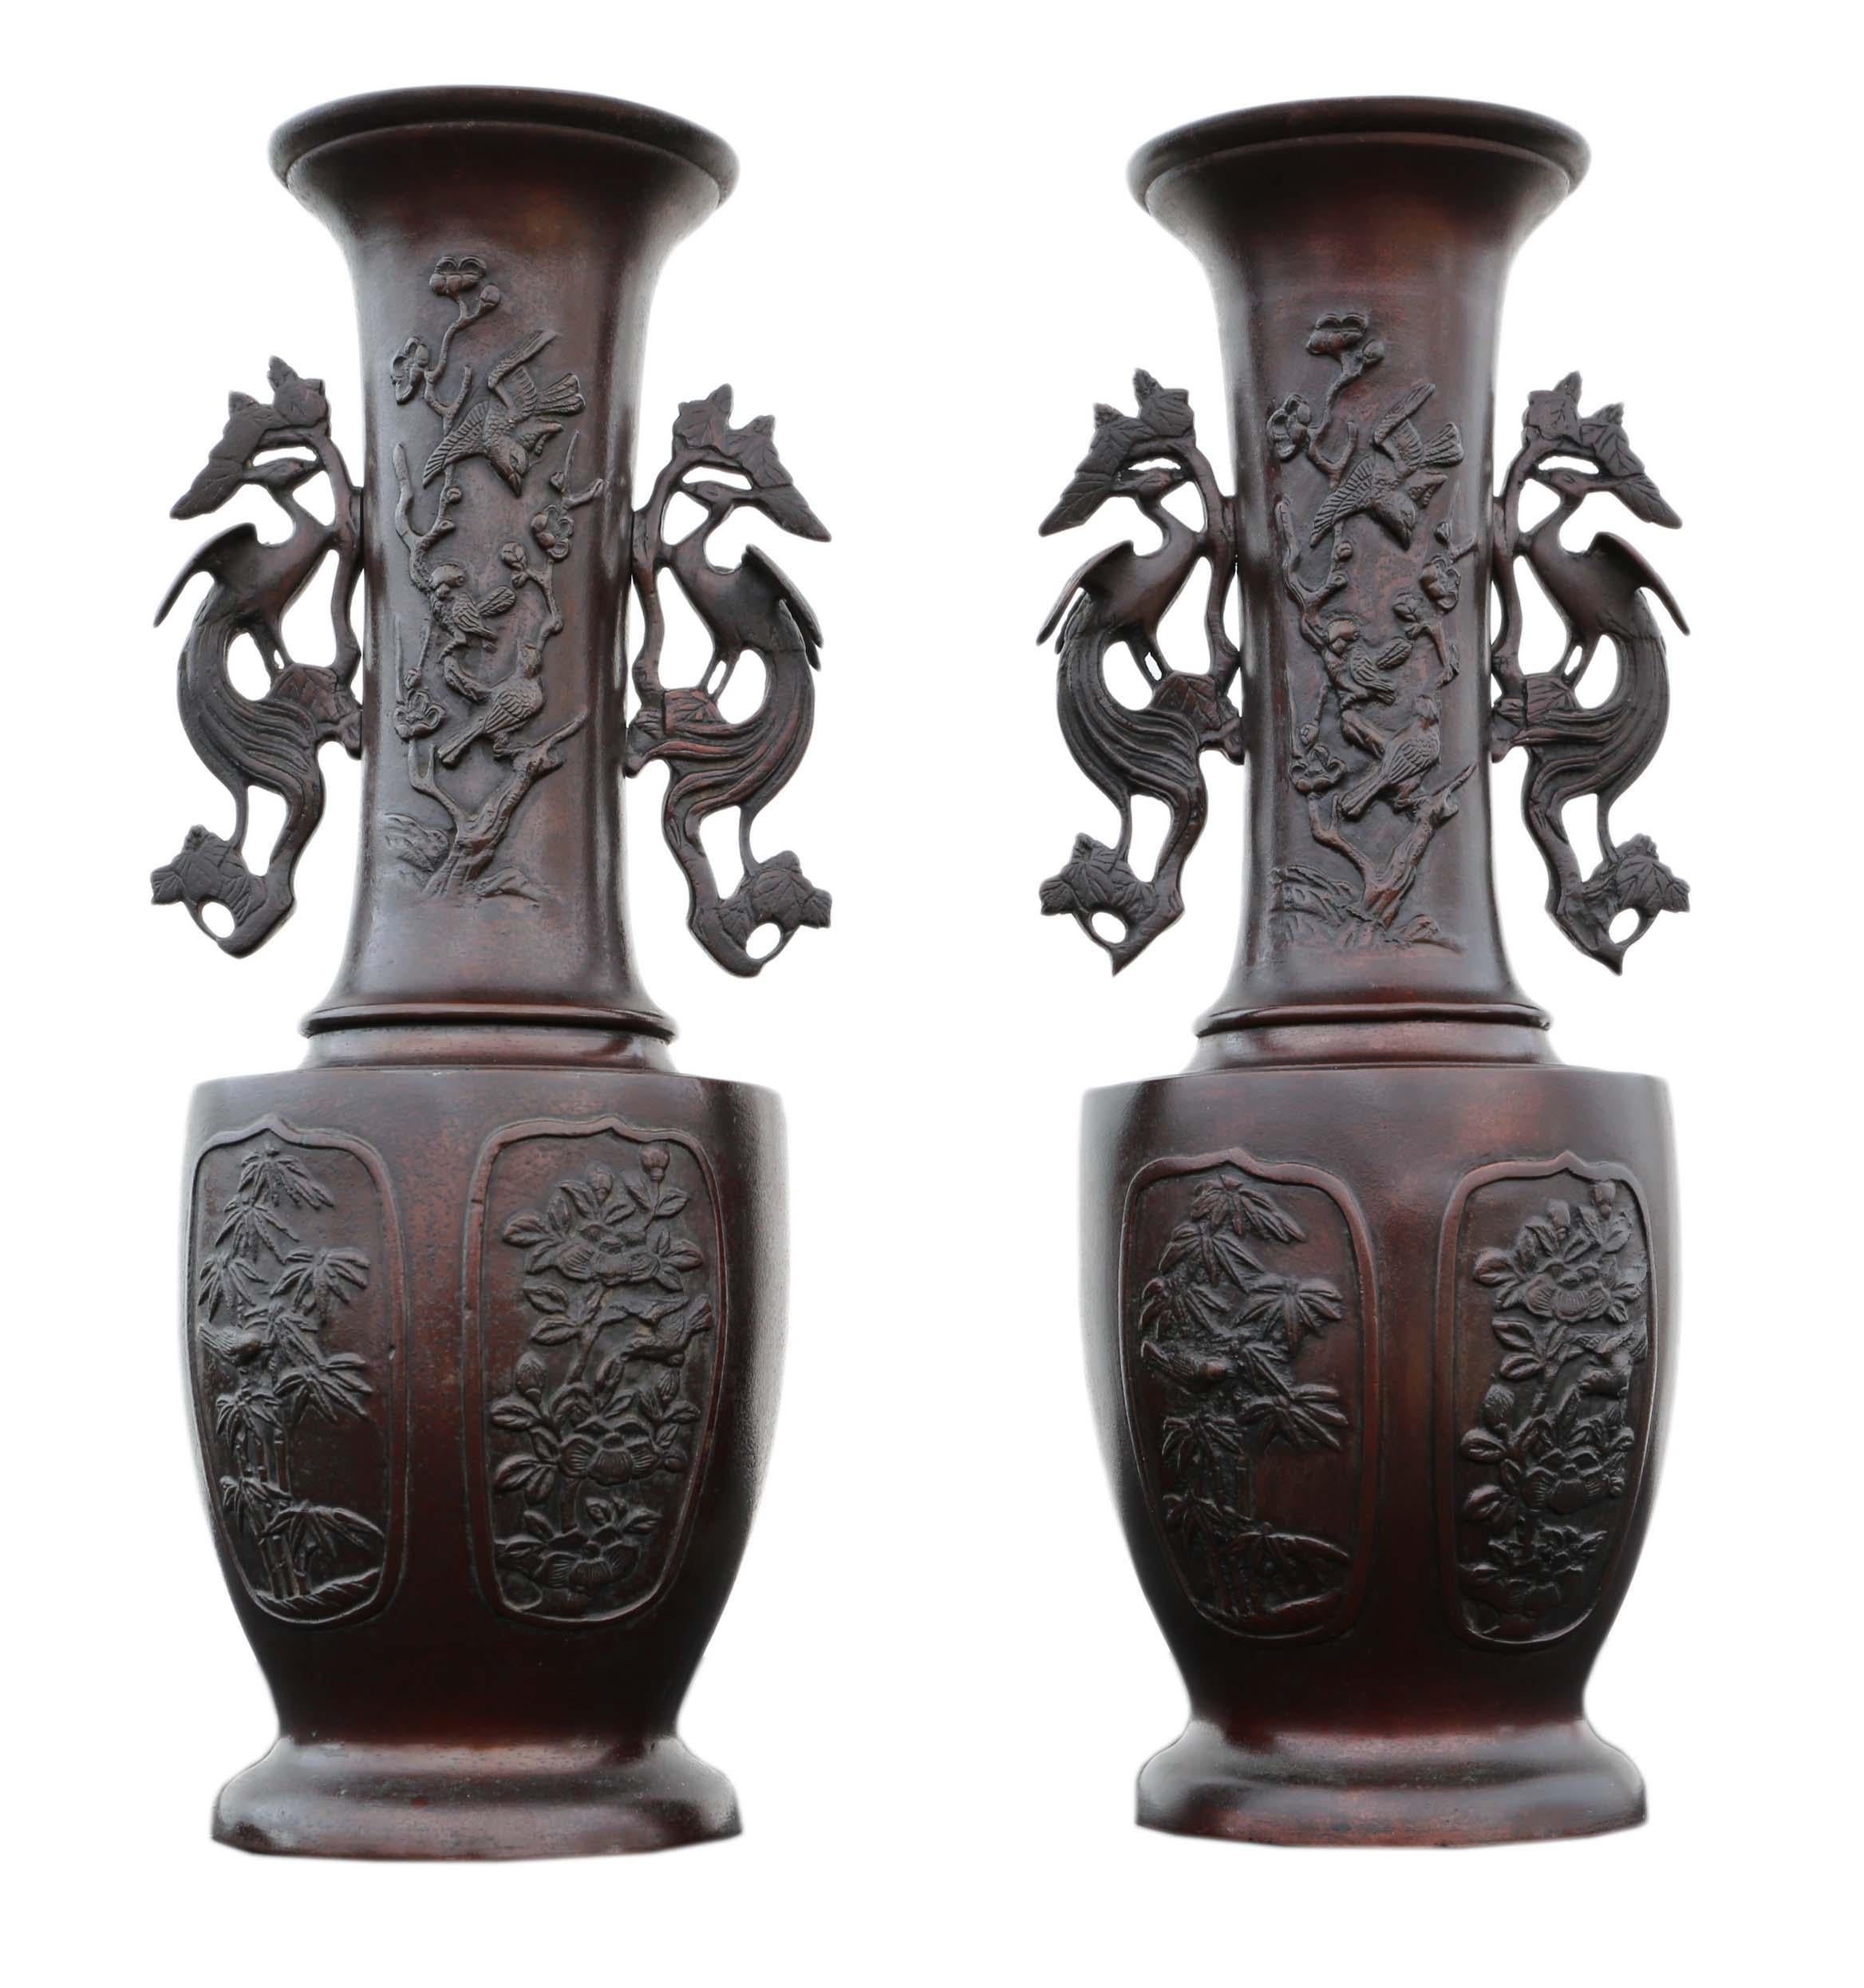 Pair of Japanese bronze vases, late 19th century Meiji period with peacock handles
Would look amazing in the right location. The very best colour and patina.
Overall maximum dimensions: ~38cm high x 15cm diameter (inner mouth 9cm diameter, inner